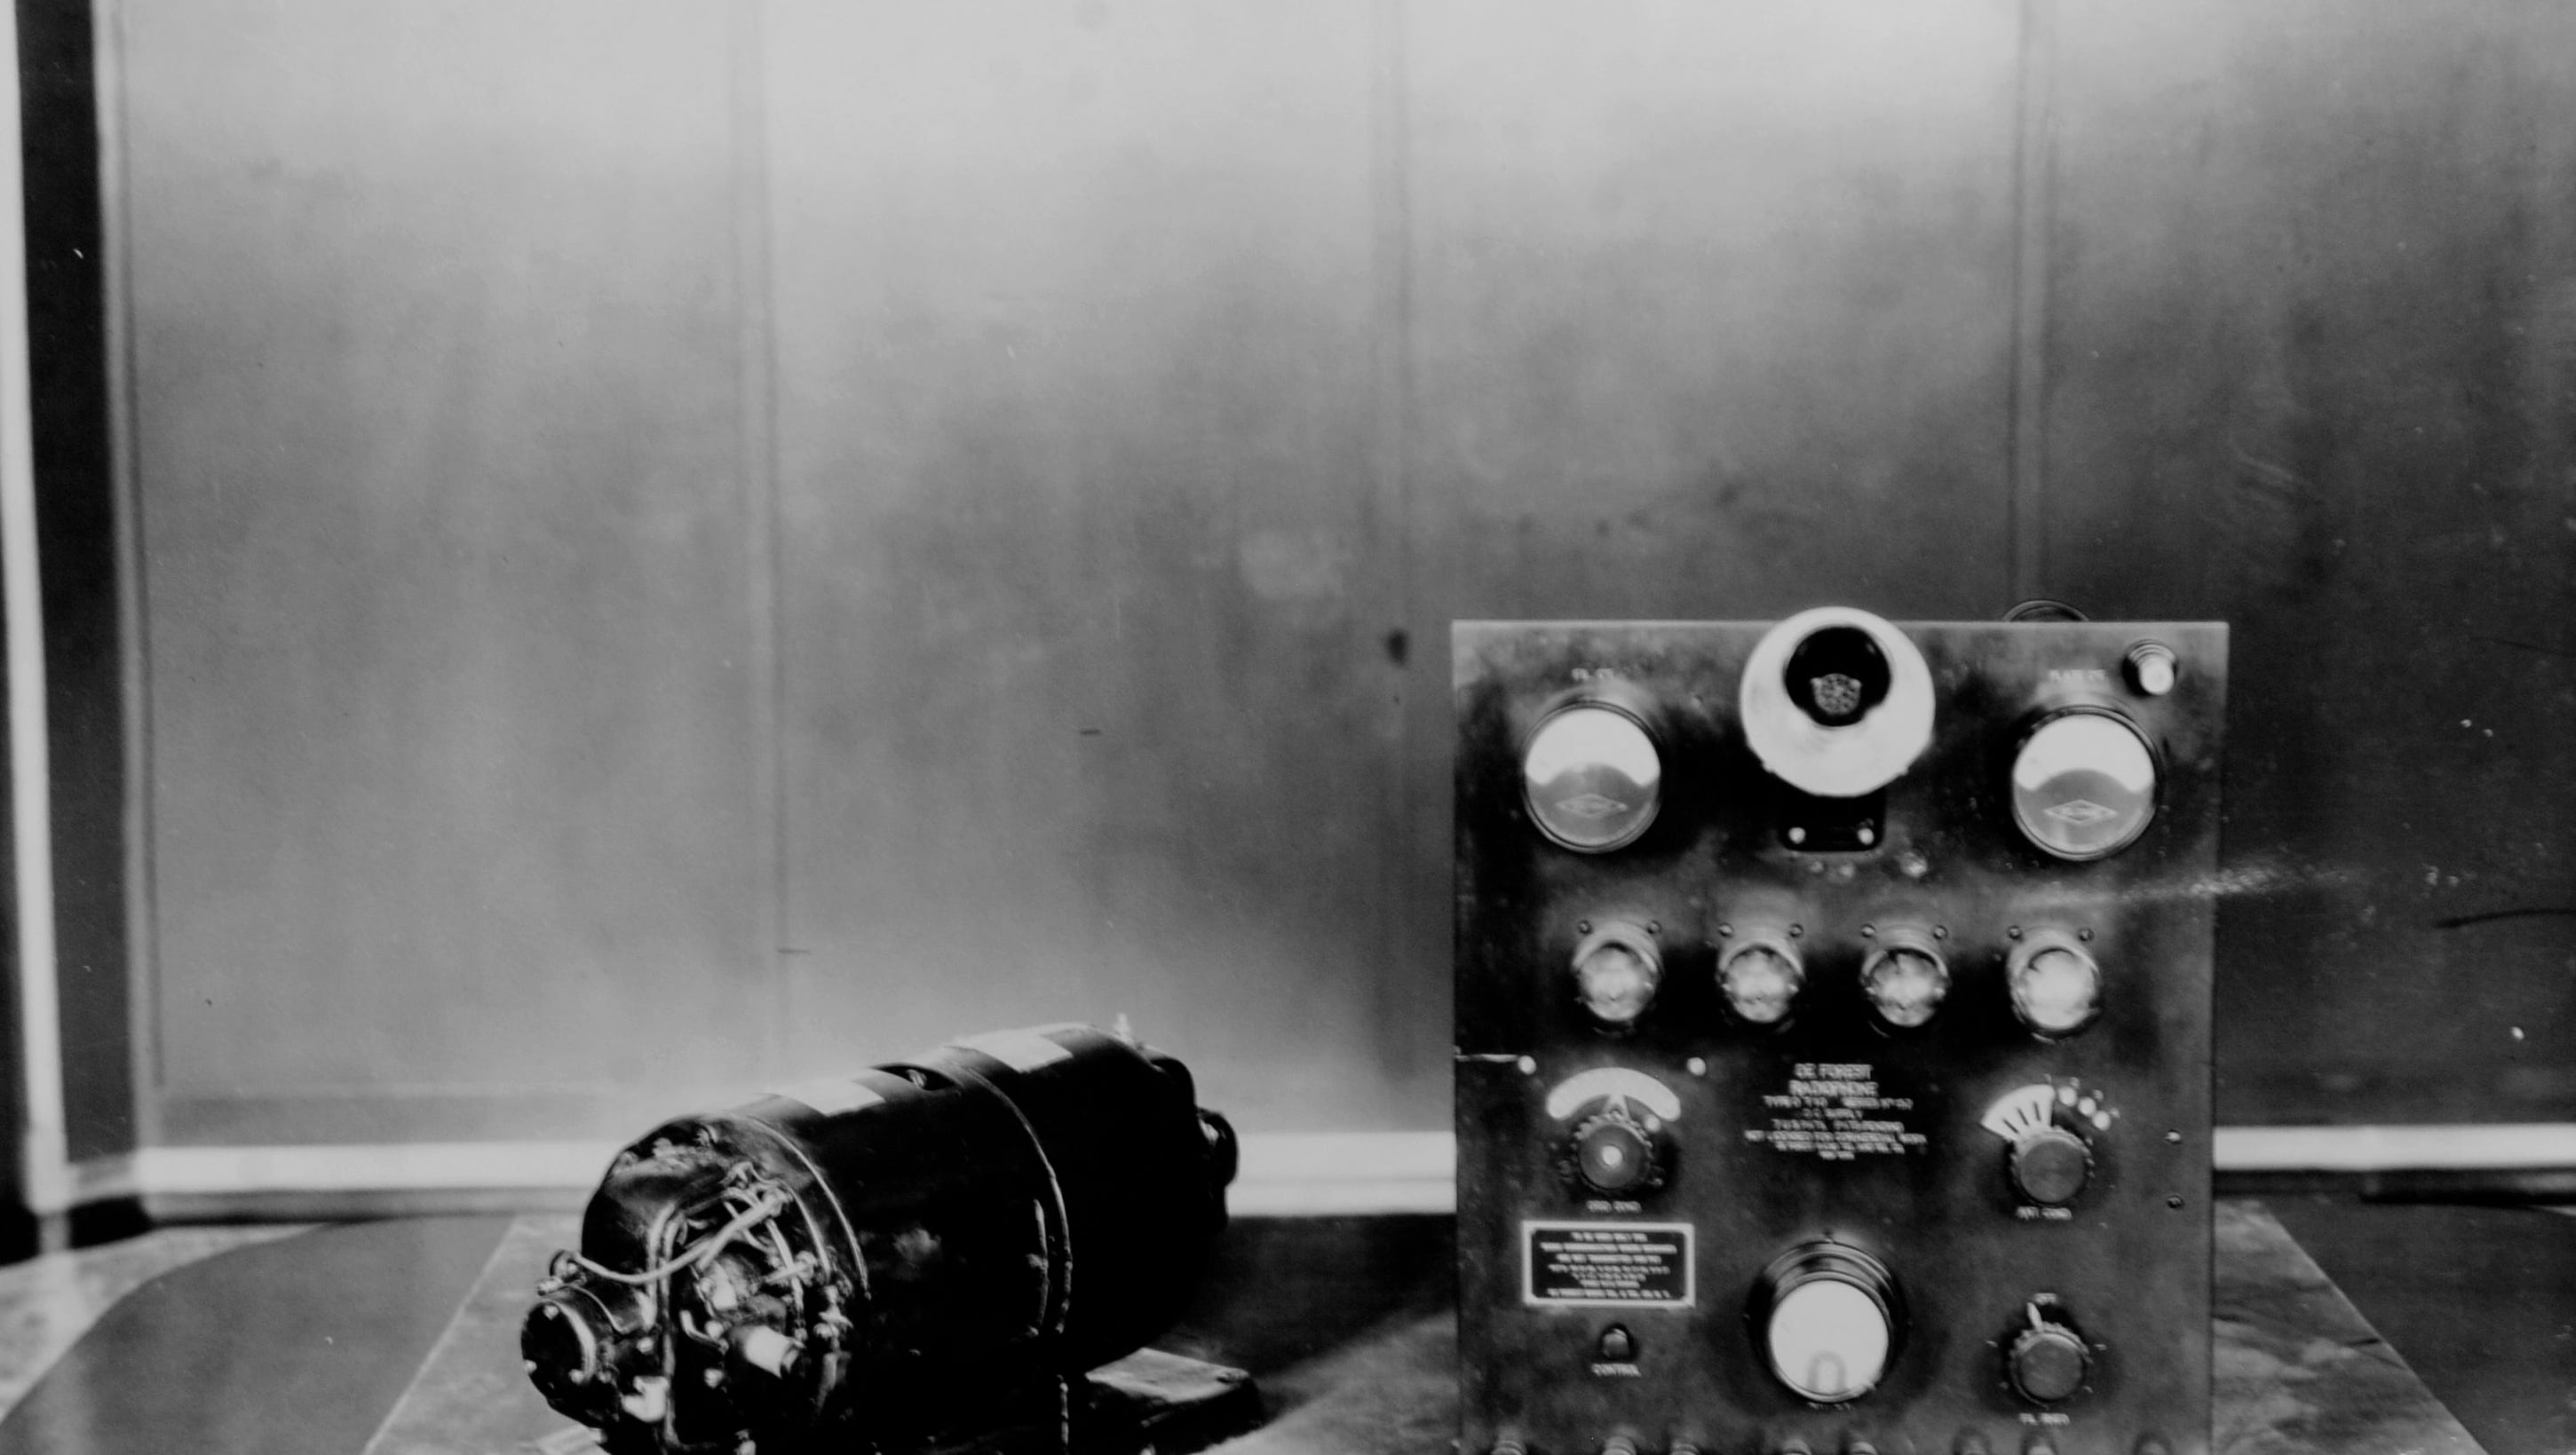 This is the first-generation equipment that powered the first transmissions of 8MK, which began broadcasting daily on an experimental basis, becoming the world's first commercial radio broadcasting station.   A quarter-horsepower motor drove the 150-watt/500 volt direct current generator that powered the transmitter, right, consisting of two oscillator and two rectifier tubes.